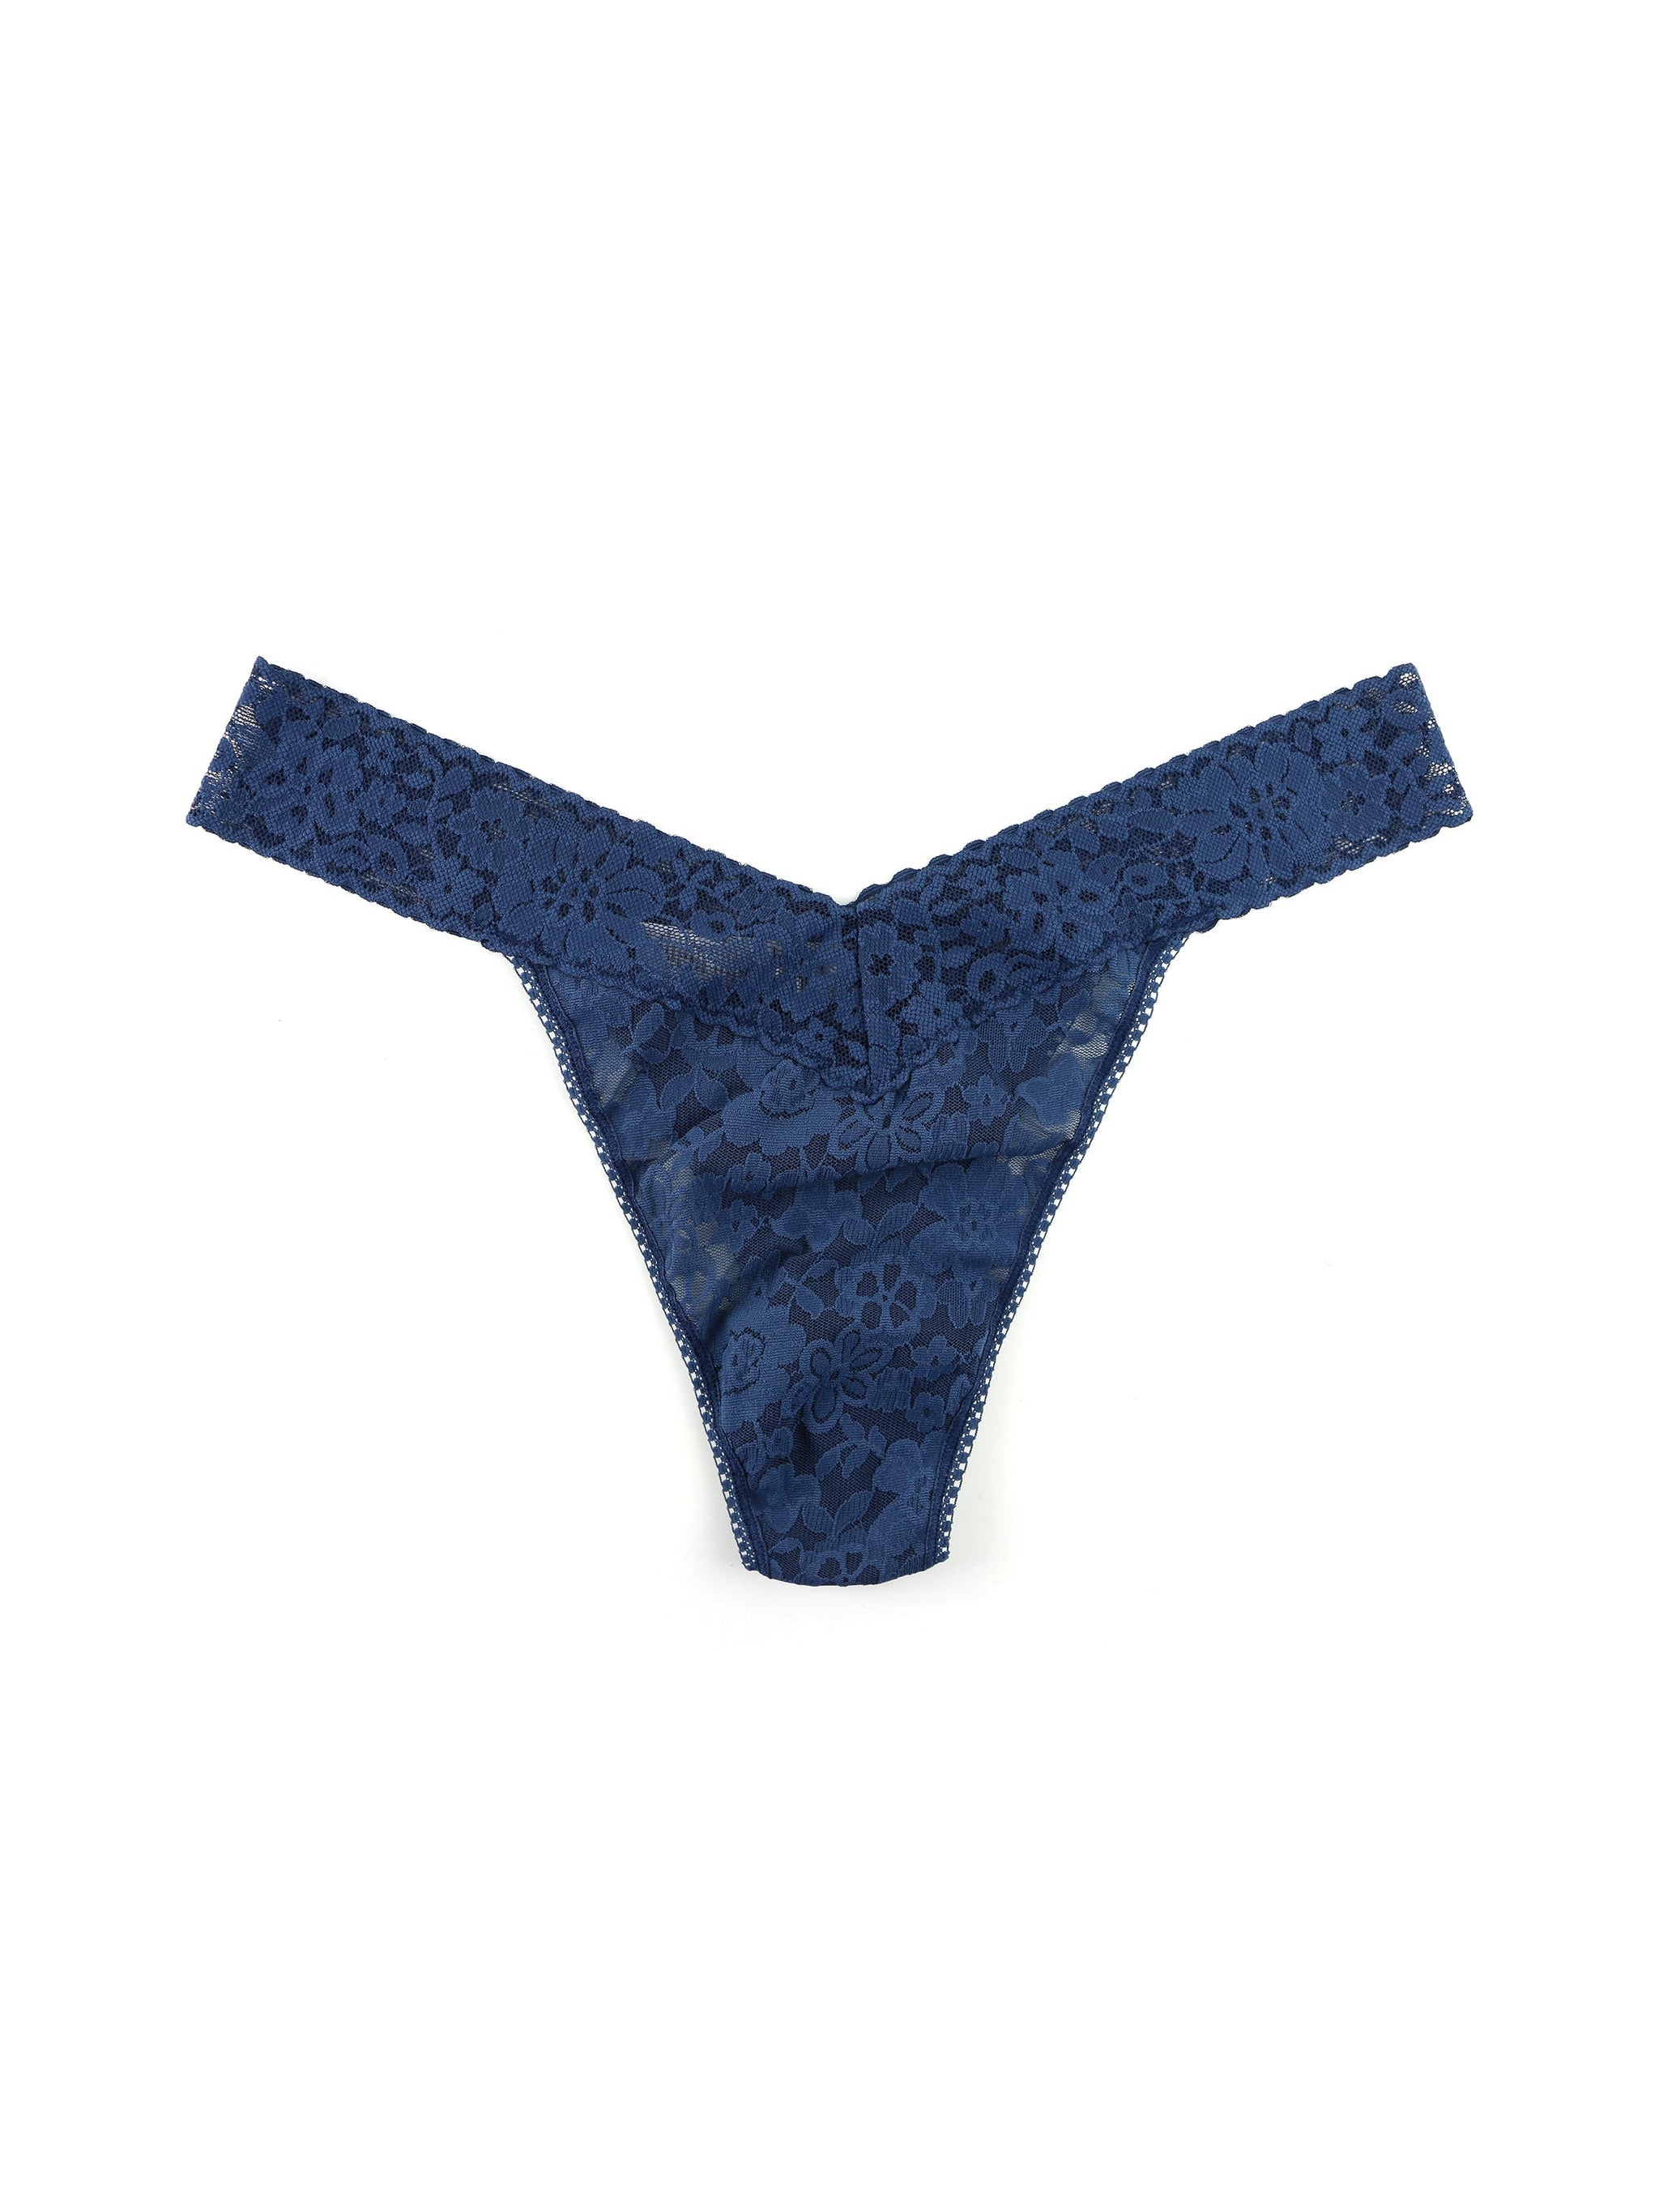 Plus Size Daily Lace™ Original Rise Thong Exclusive Nightshade Blue Sale